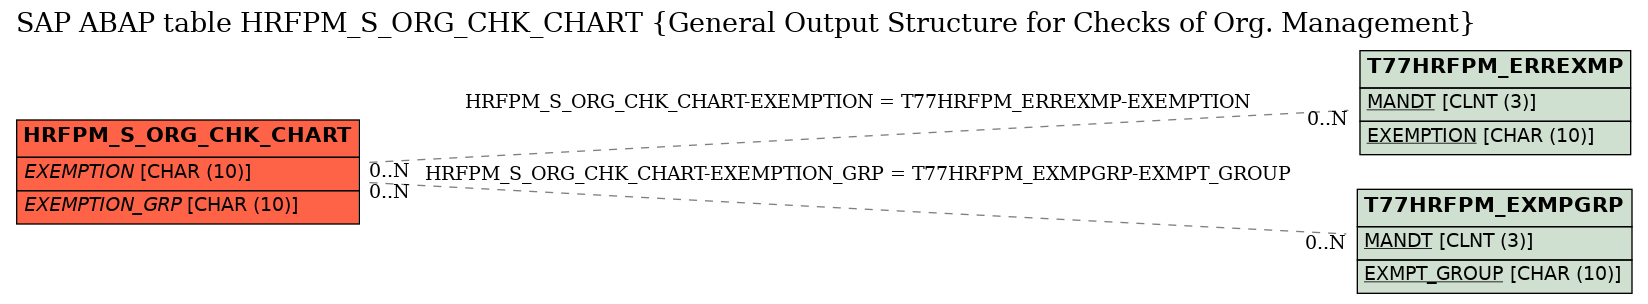 E-R Diagram for table HRFPM_S_ORG_CHK_CHART (General Output Structure for Checks of Org. Management)